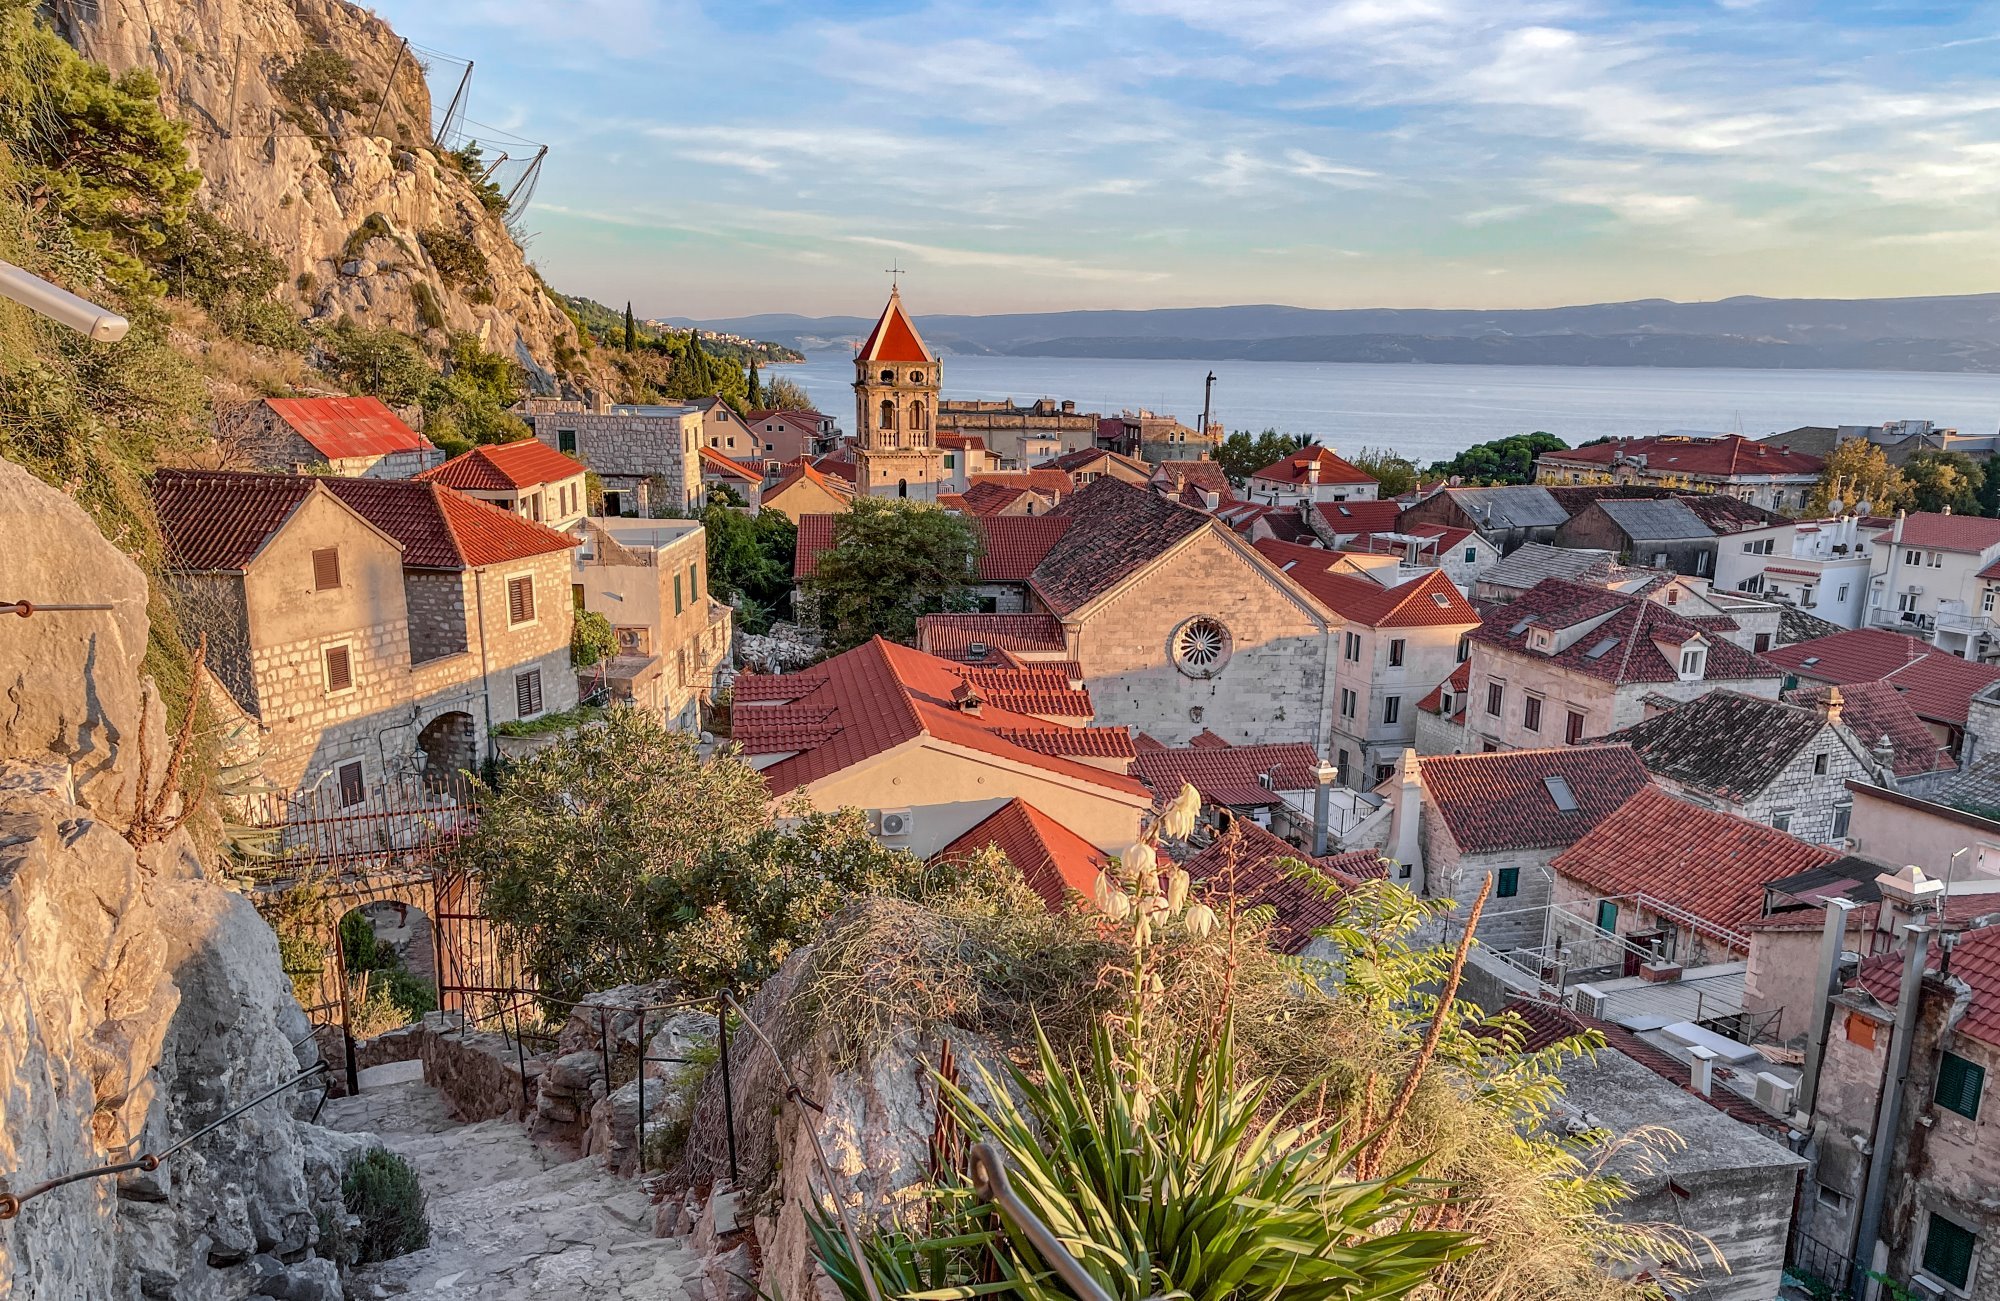 The old town of Omis, In Croatia during Spring - Traveltipzone